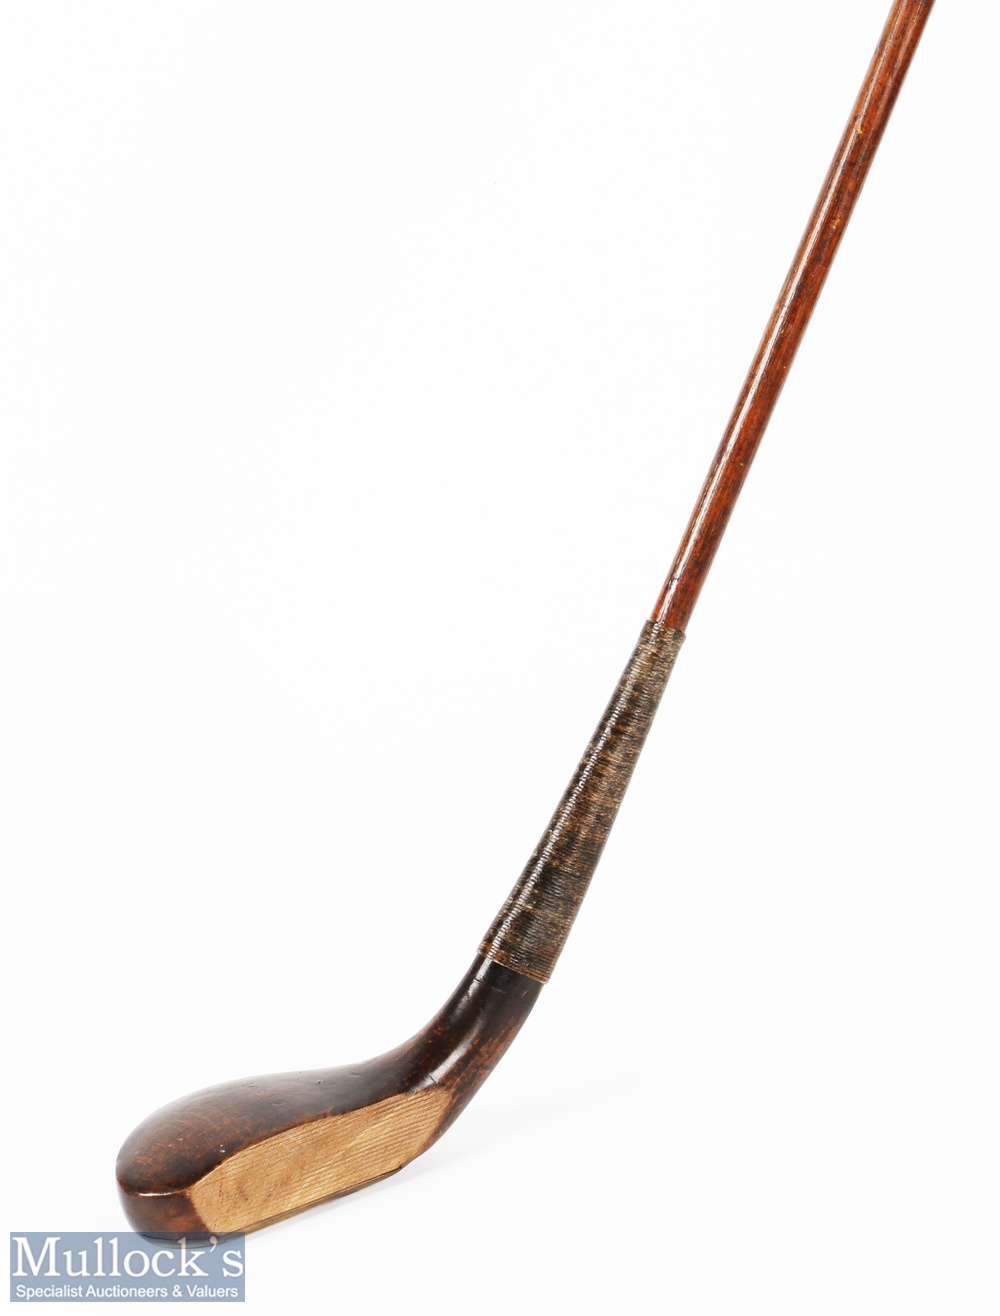 G Lowe Royal Lytham and St Annes longnose dark stained beech wood play club c1888 - overall 43. - Image 2 of 5